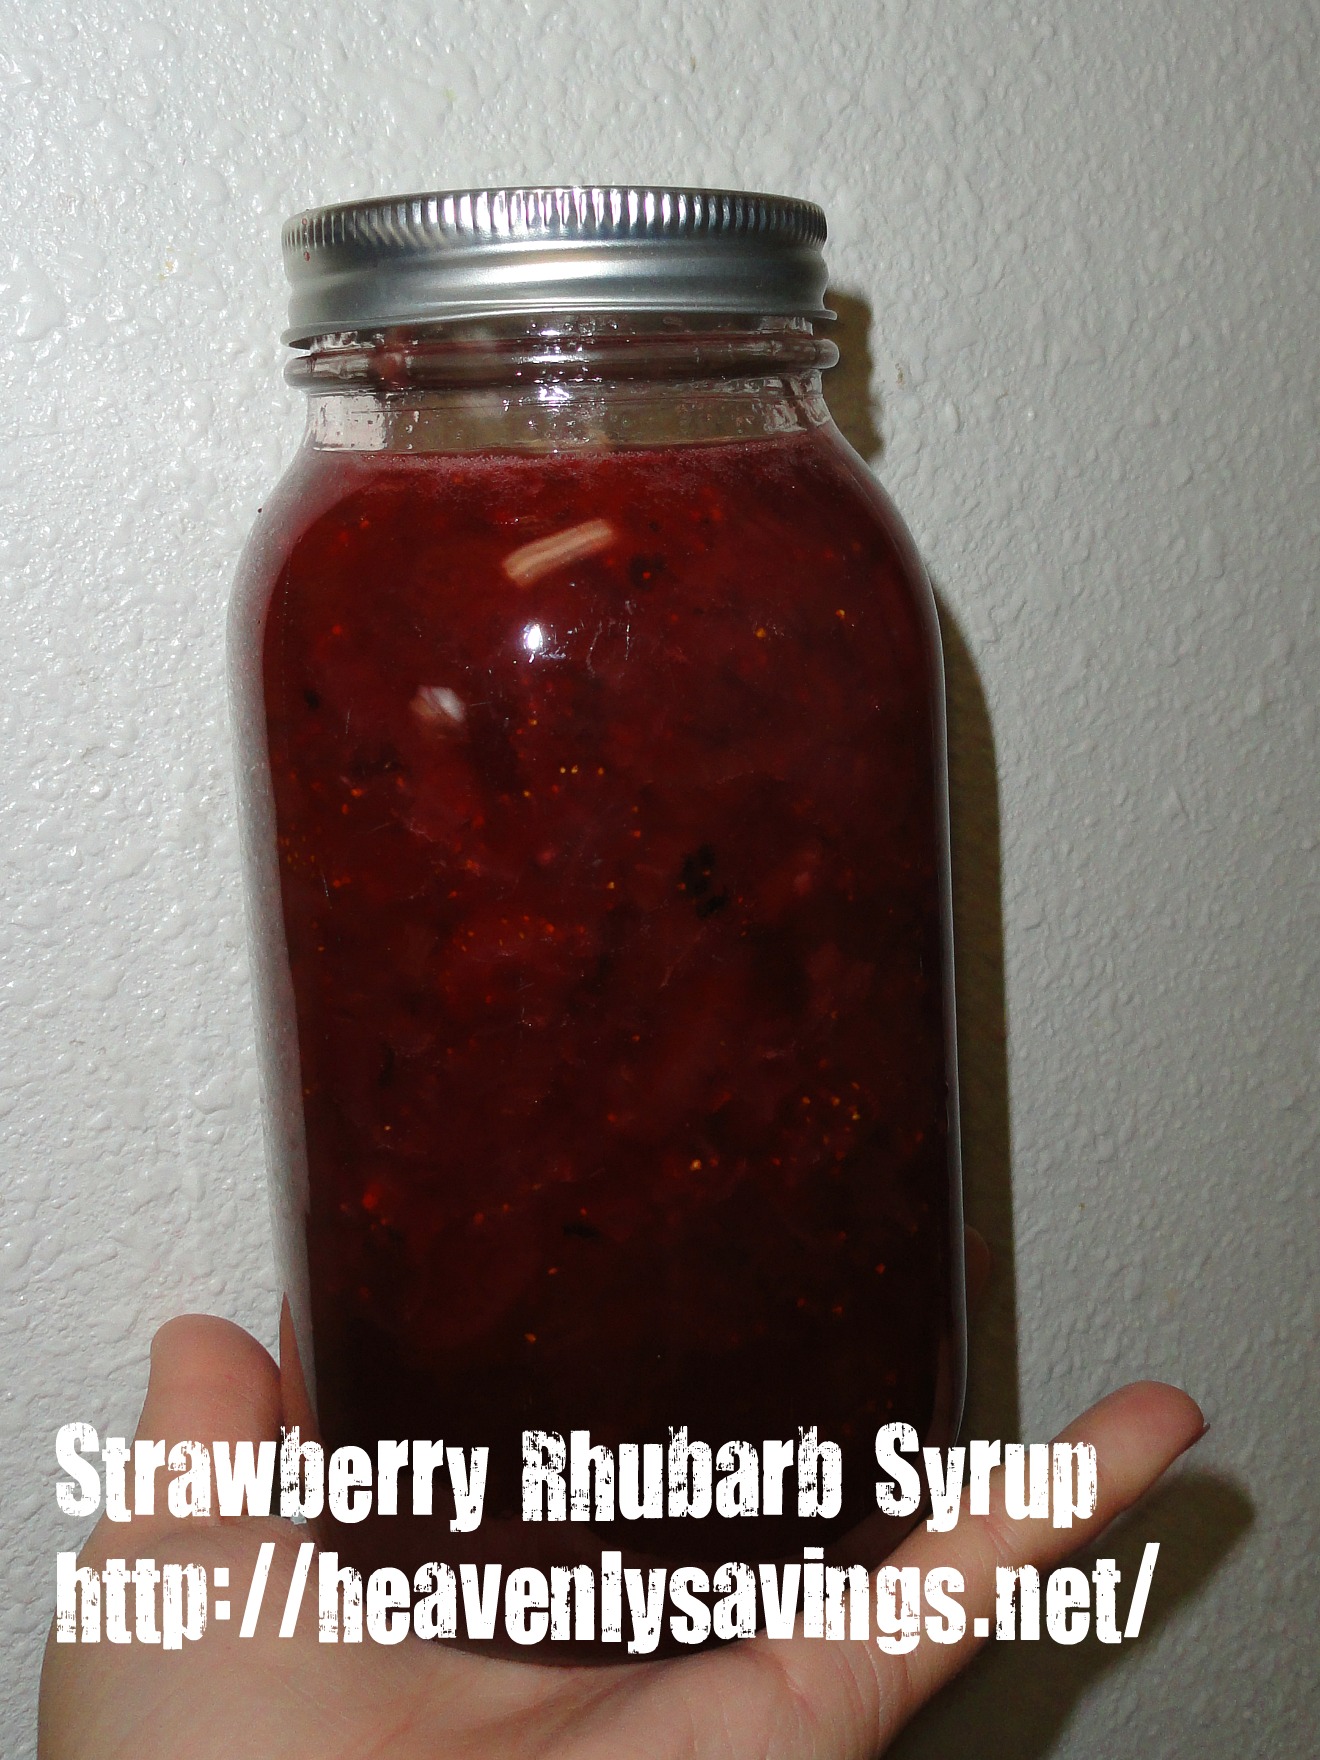 Canned Strawberry Rhubarb Syrup!